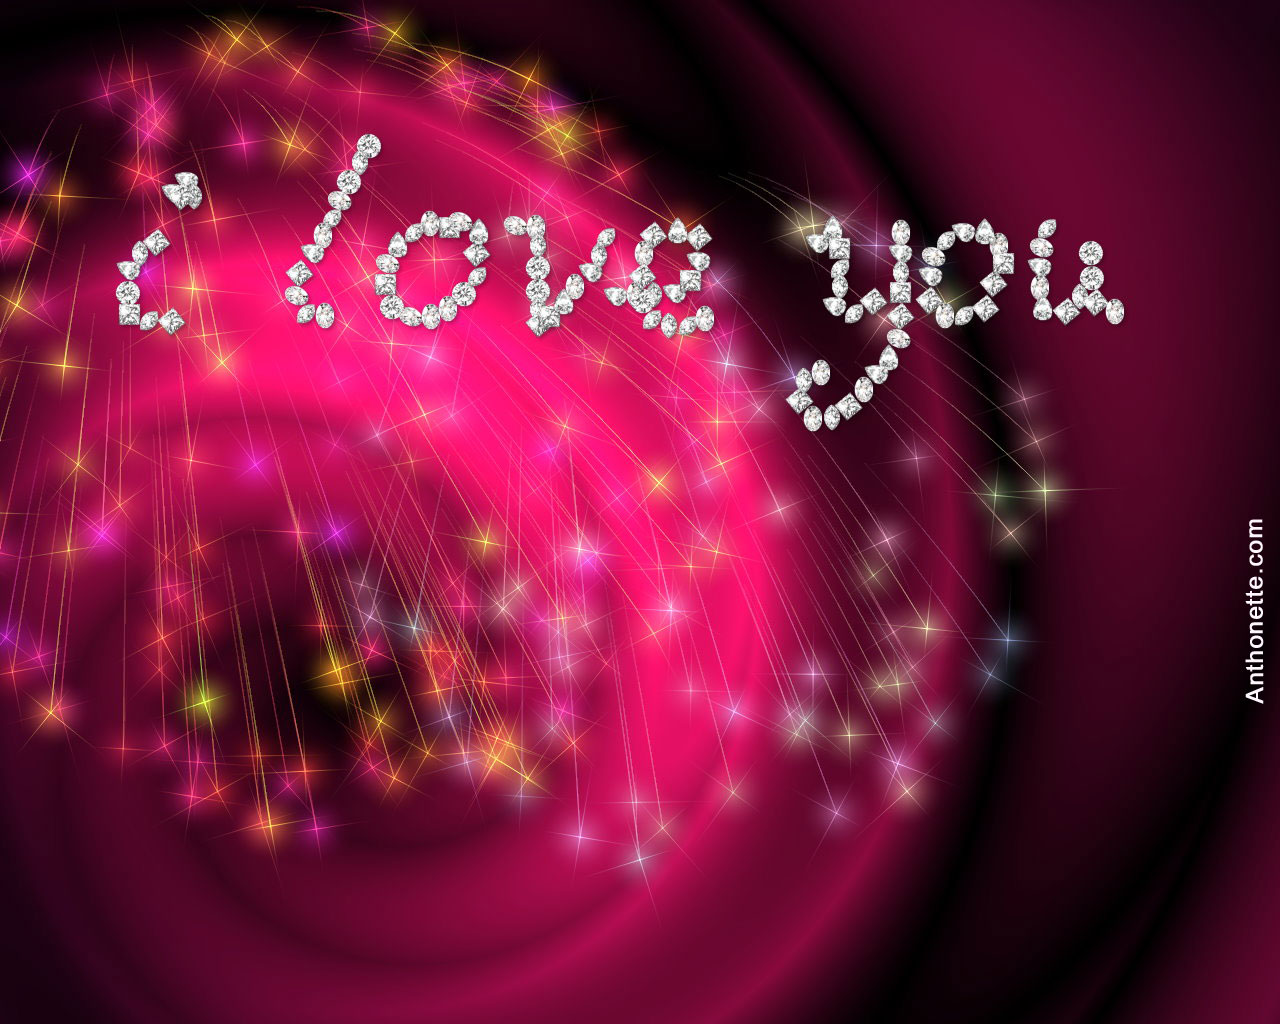 I Love You Quotes With Wallpapers. QuotesGram